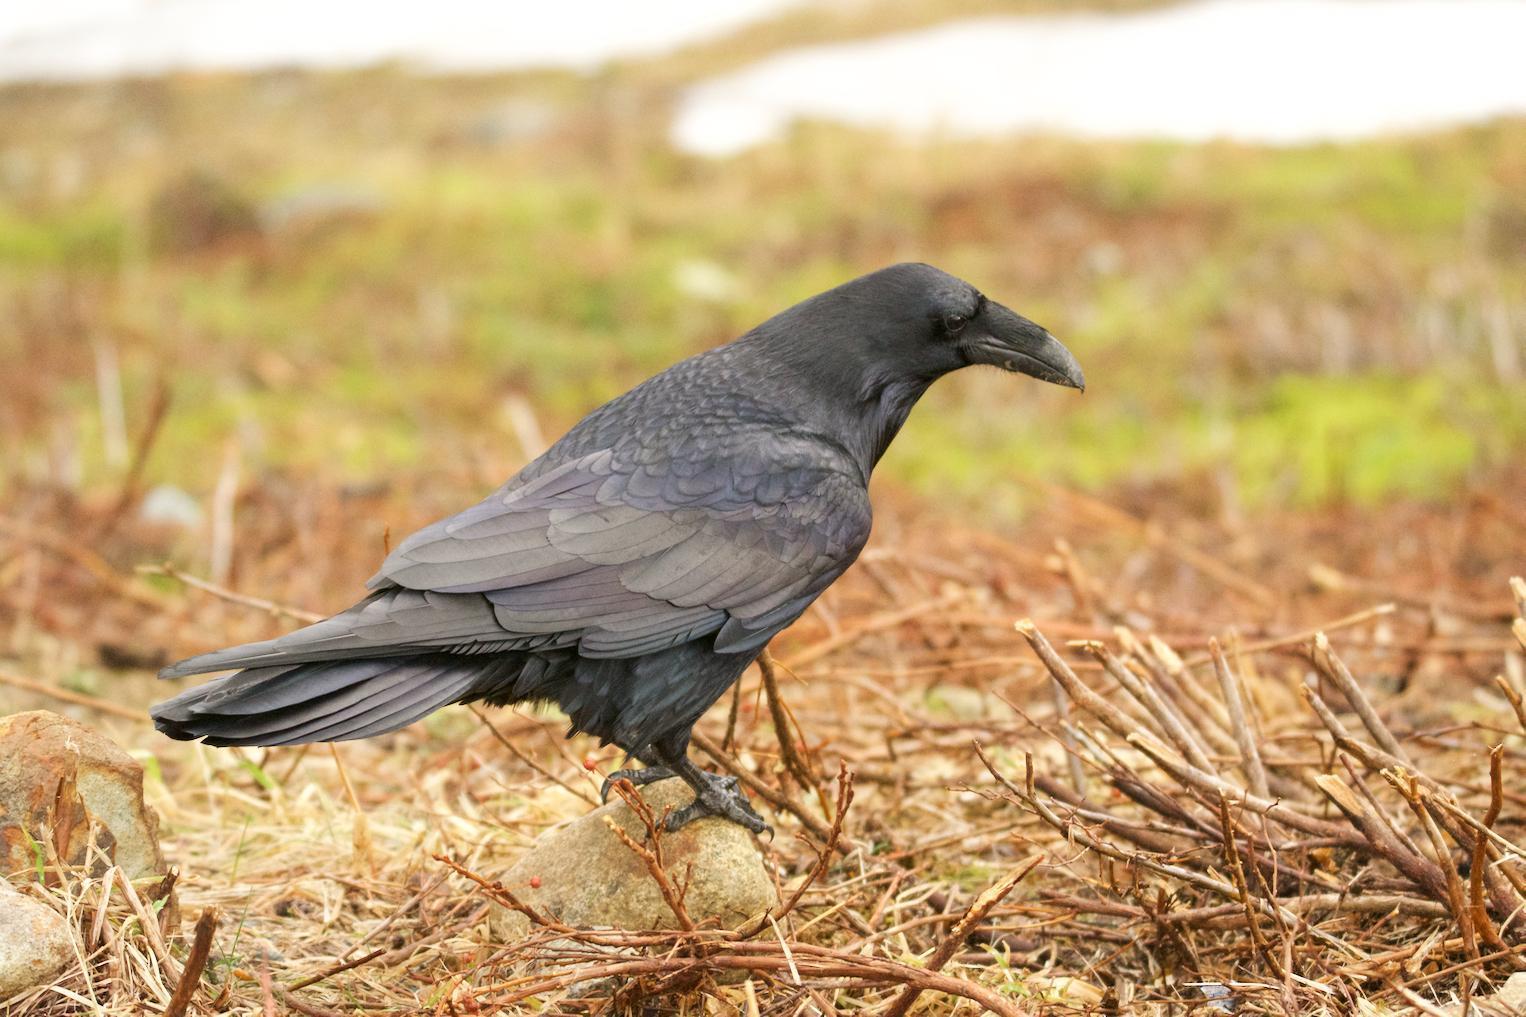 Common Raven Photo by Brian Avent